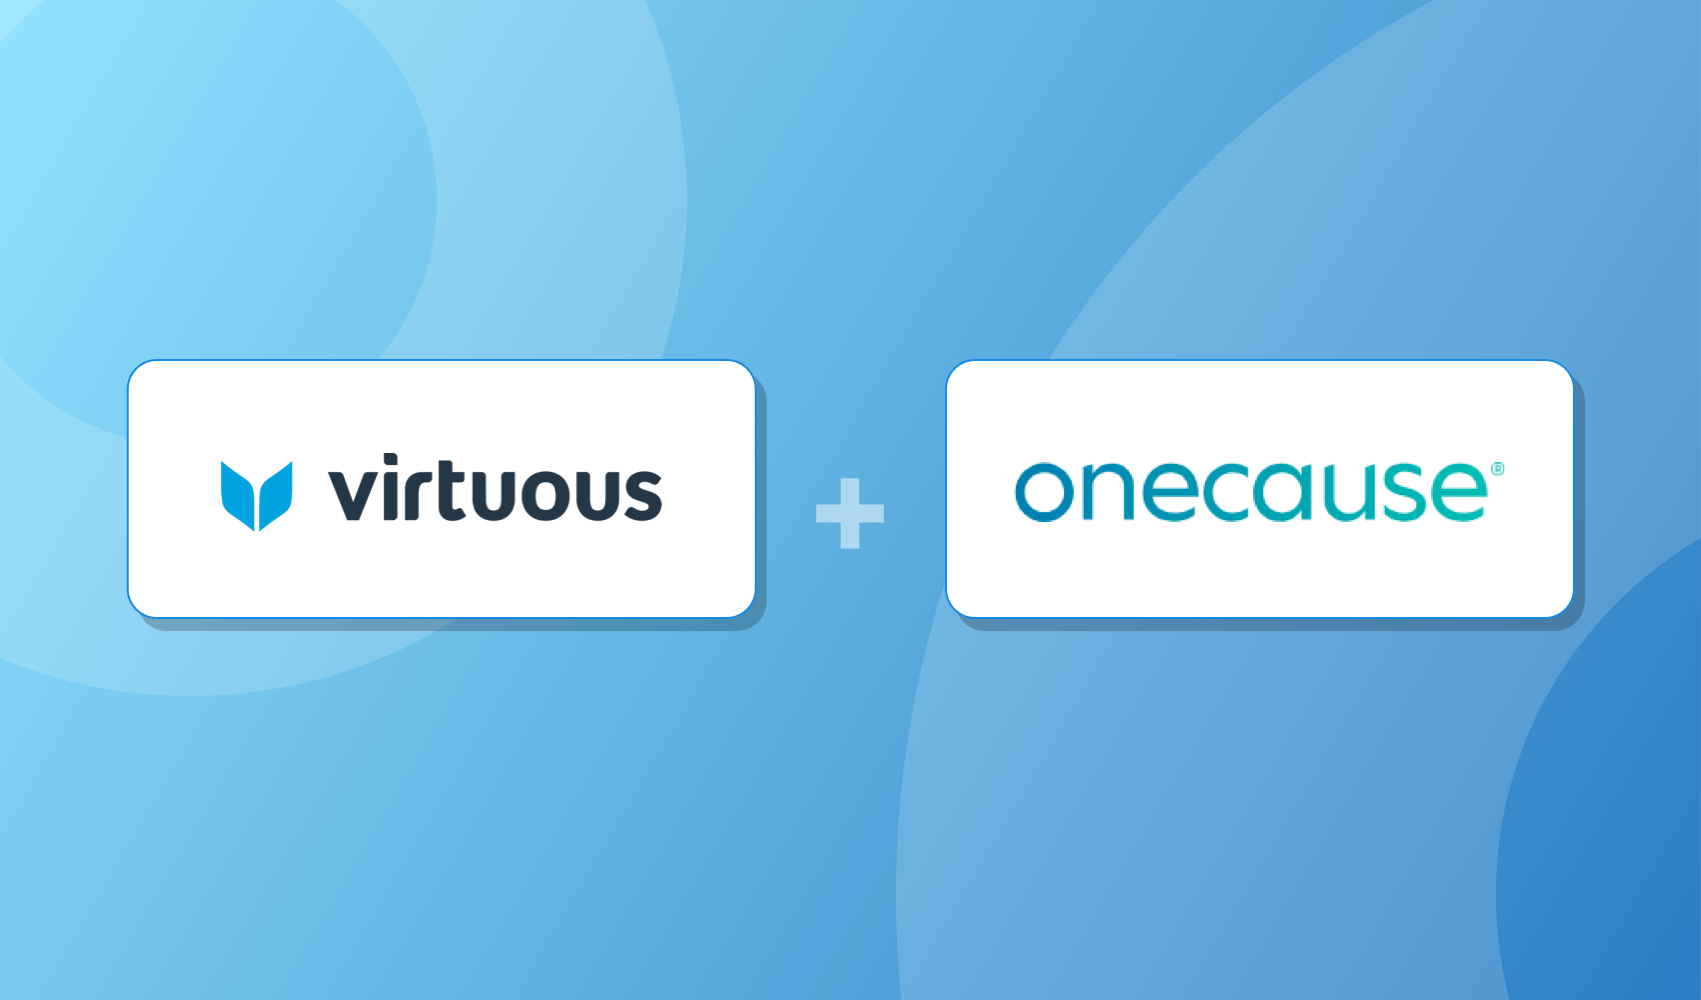 Virtuous announces integration with OneCause.